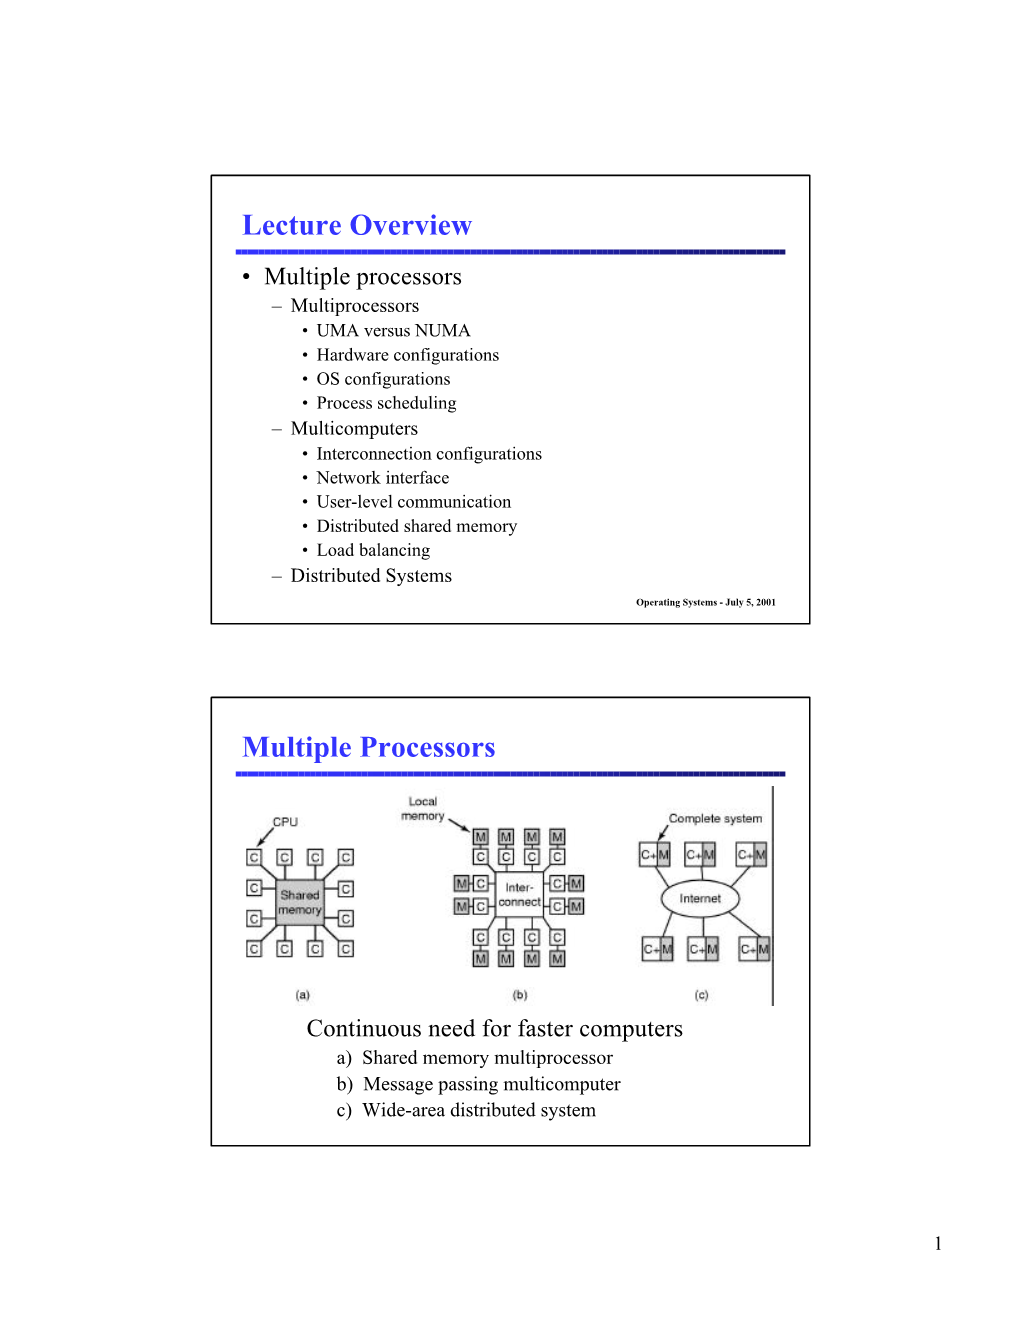 Lecture Overview Multiple Processors